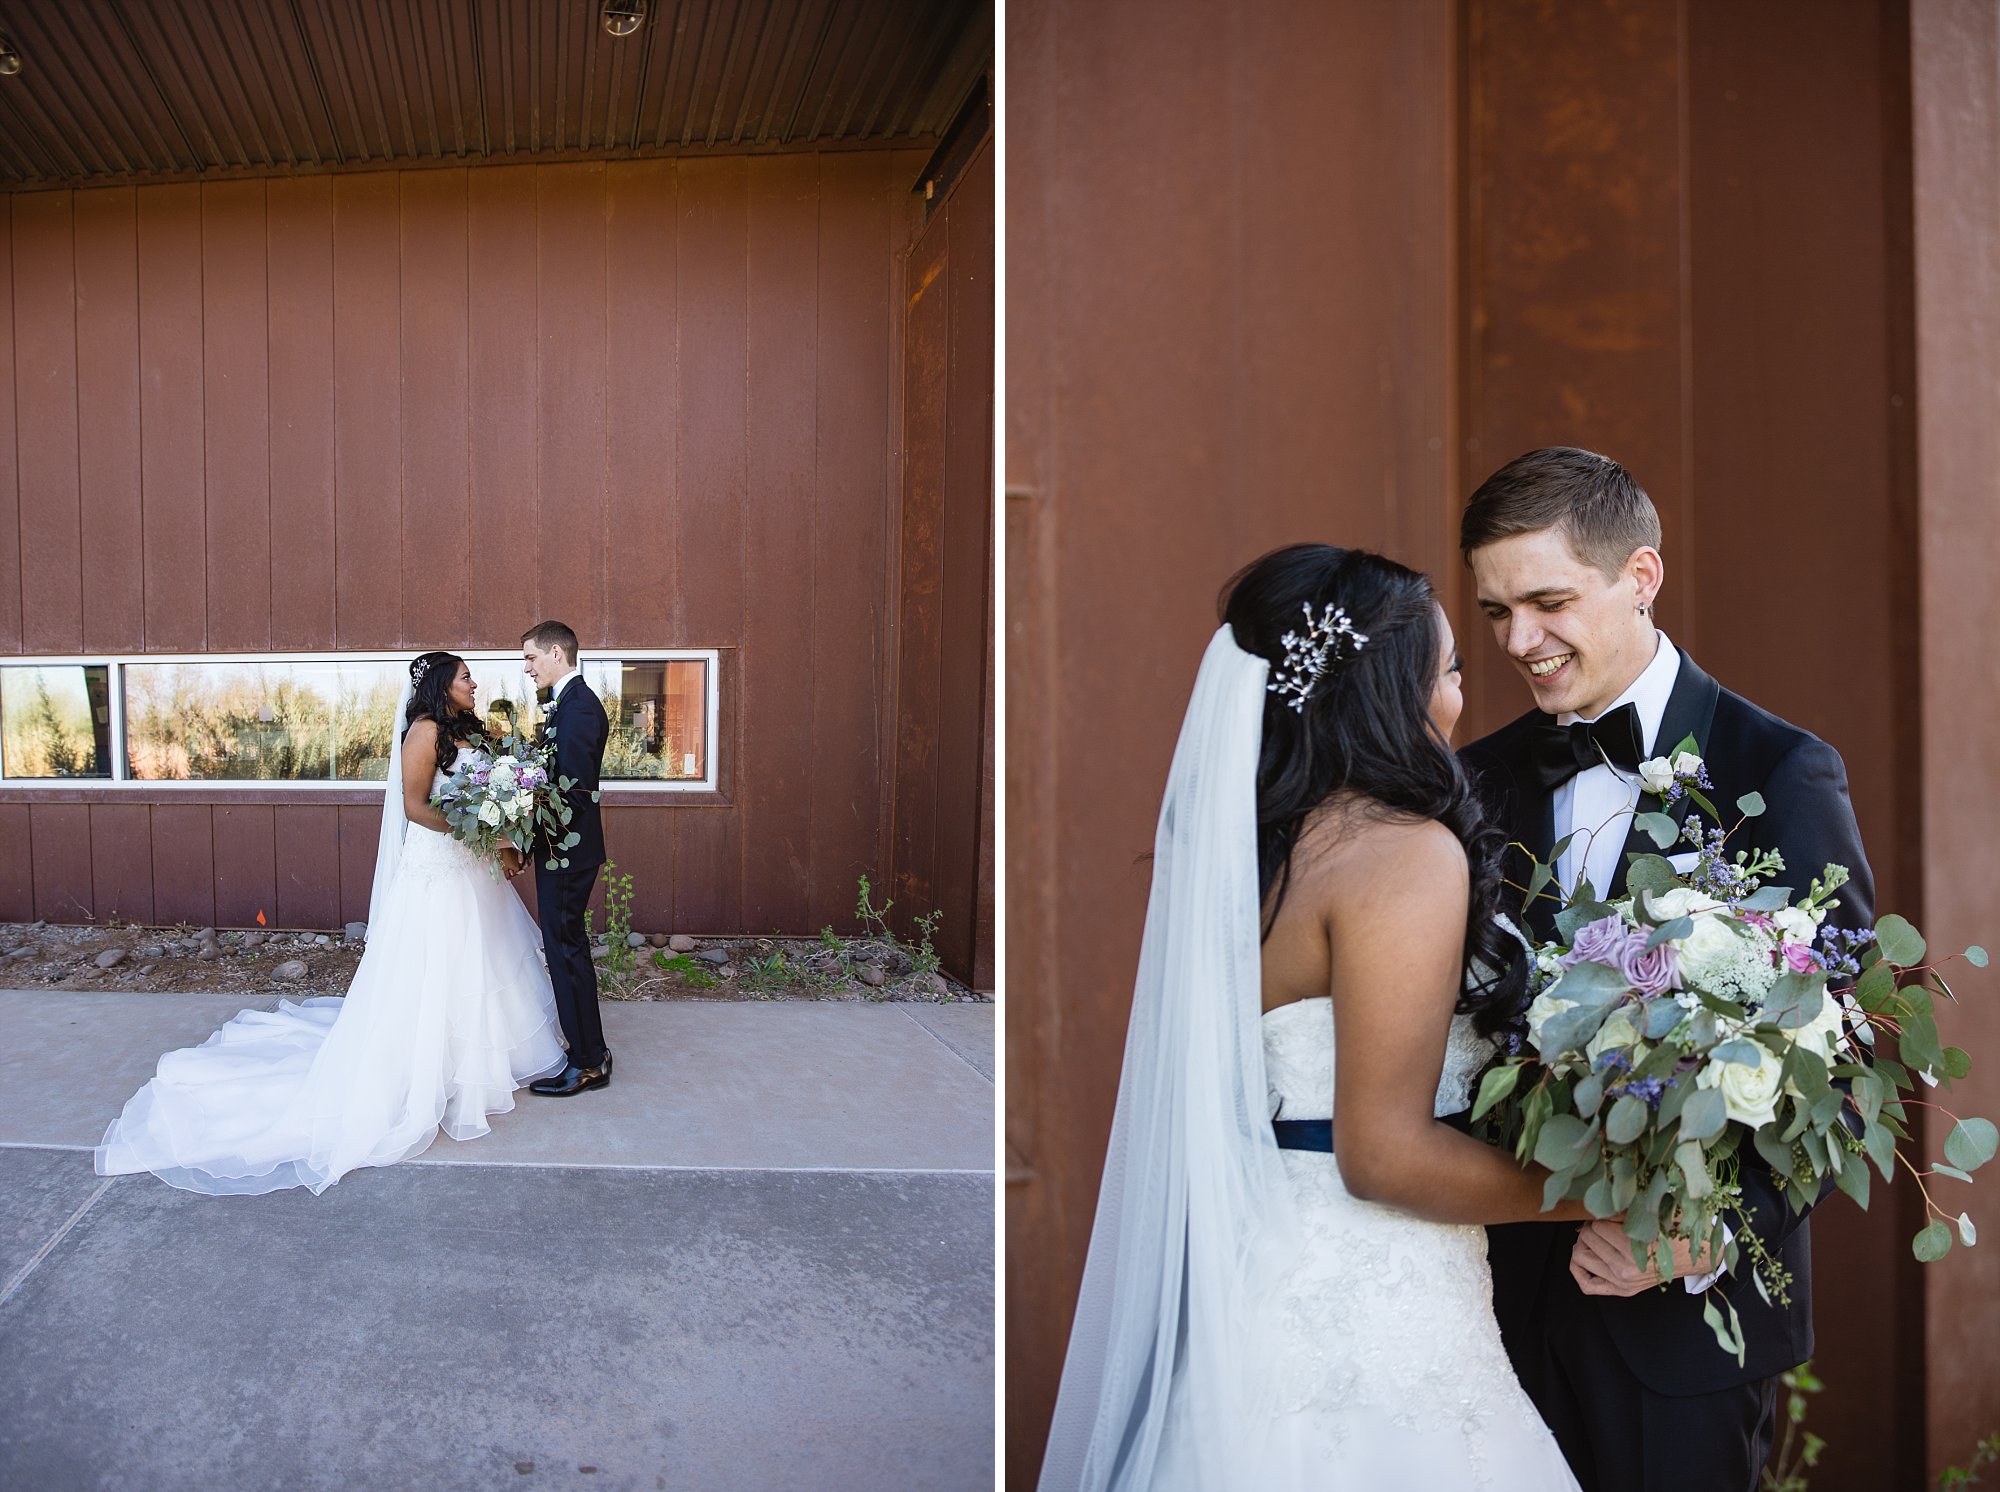 Bride and groom during their first look at the Rio Salado Audubon wedding venue in Phoenix Arizona by wedding photographer PMA Photography.